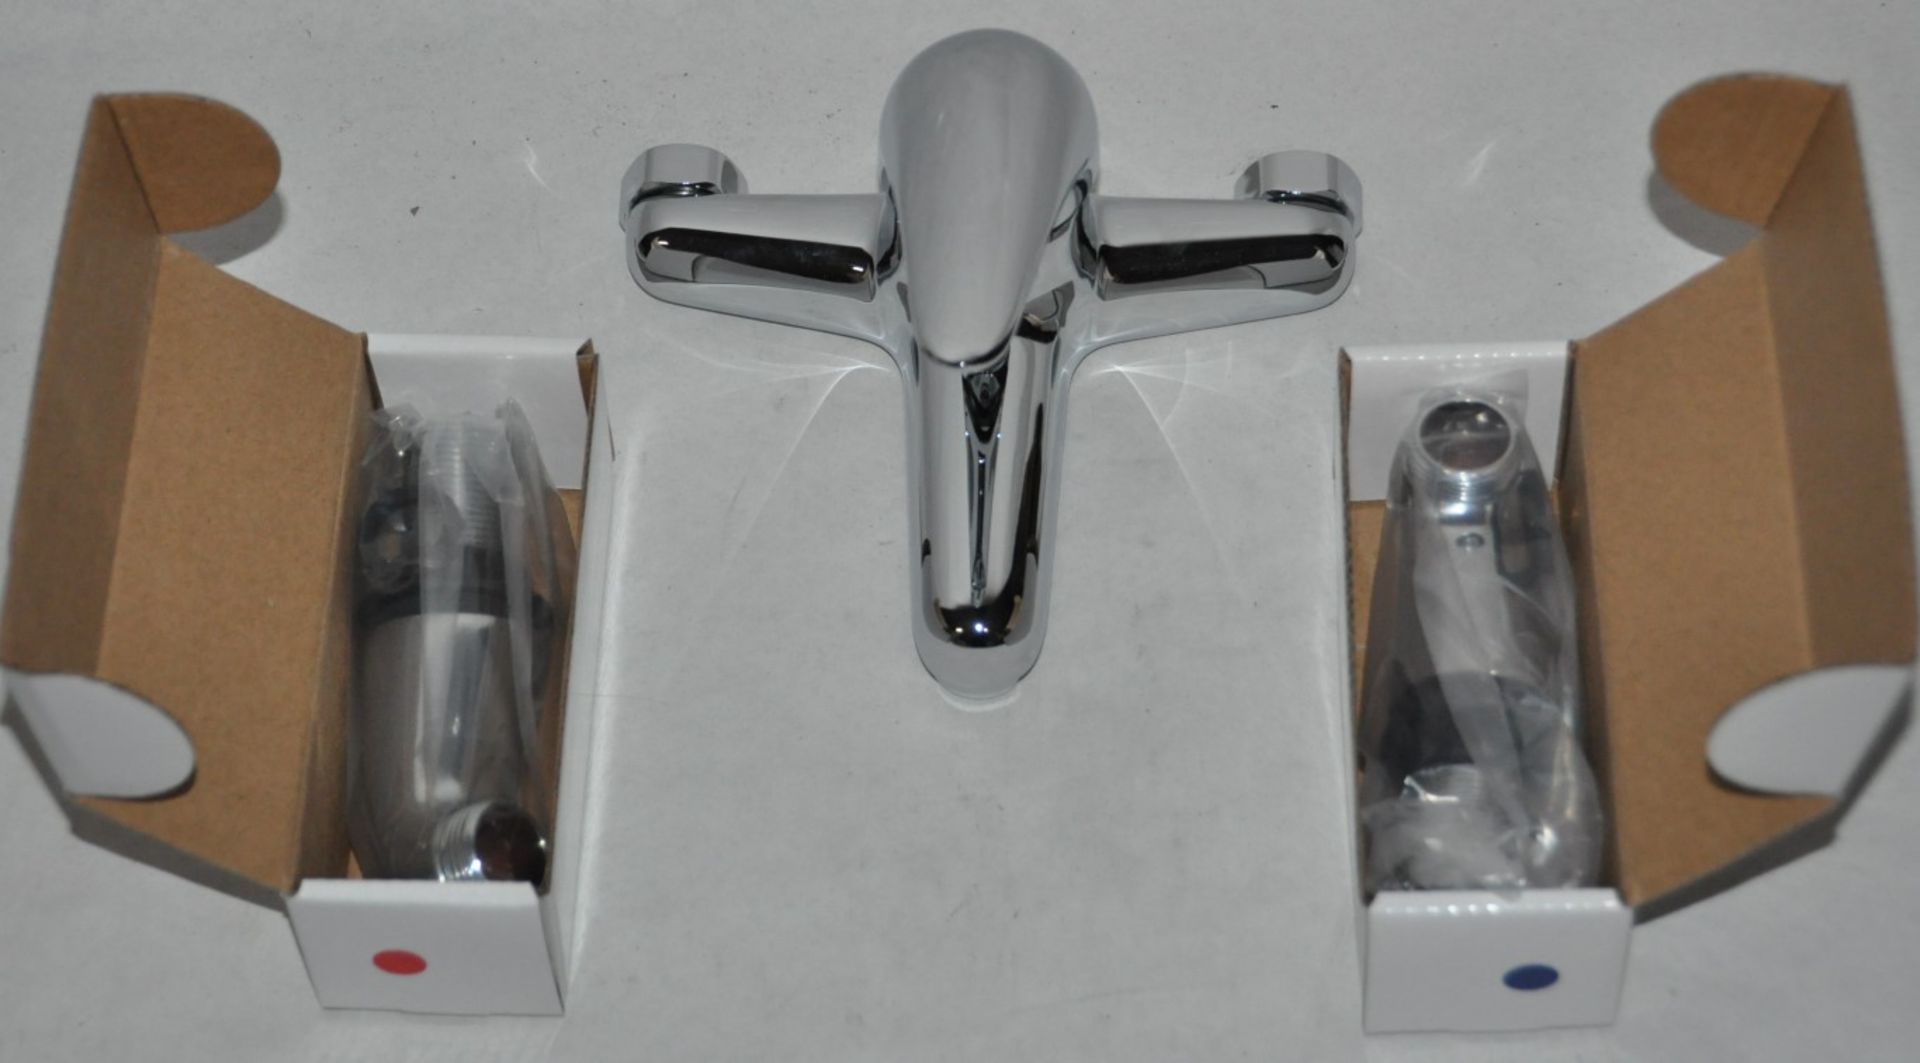 1 x Chrome Bath Filler – Used Commercial Samples - Boxed in Good Condition – Complete – Model : - Image 5 of 6